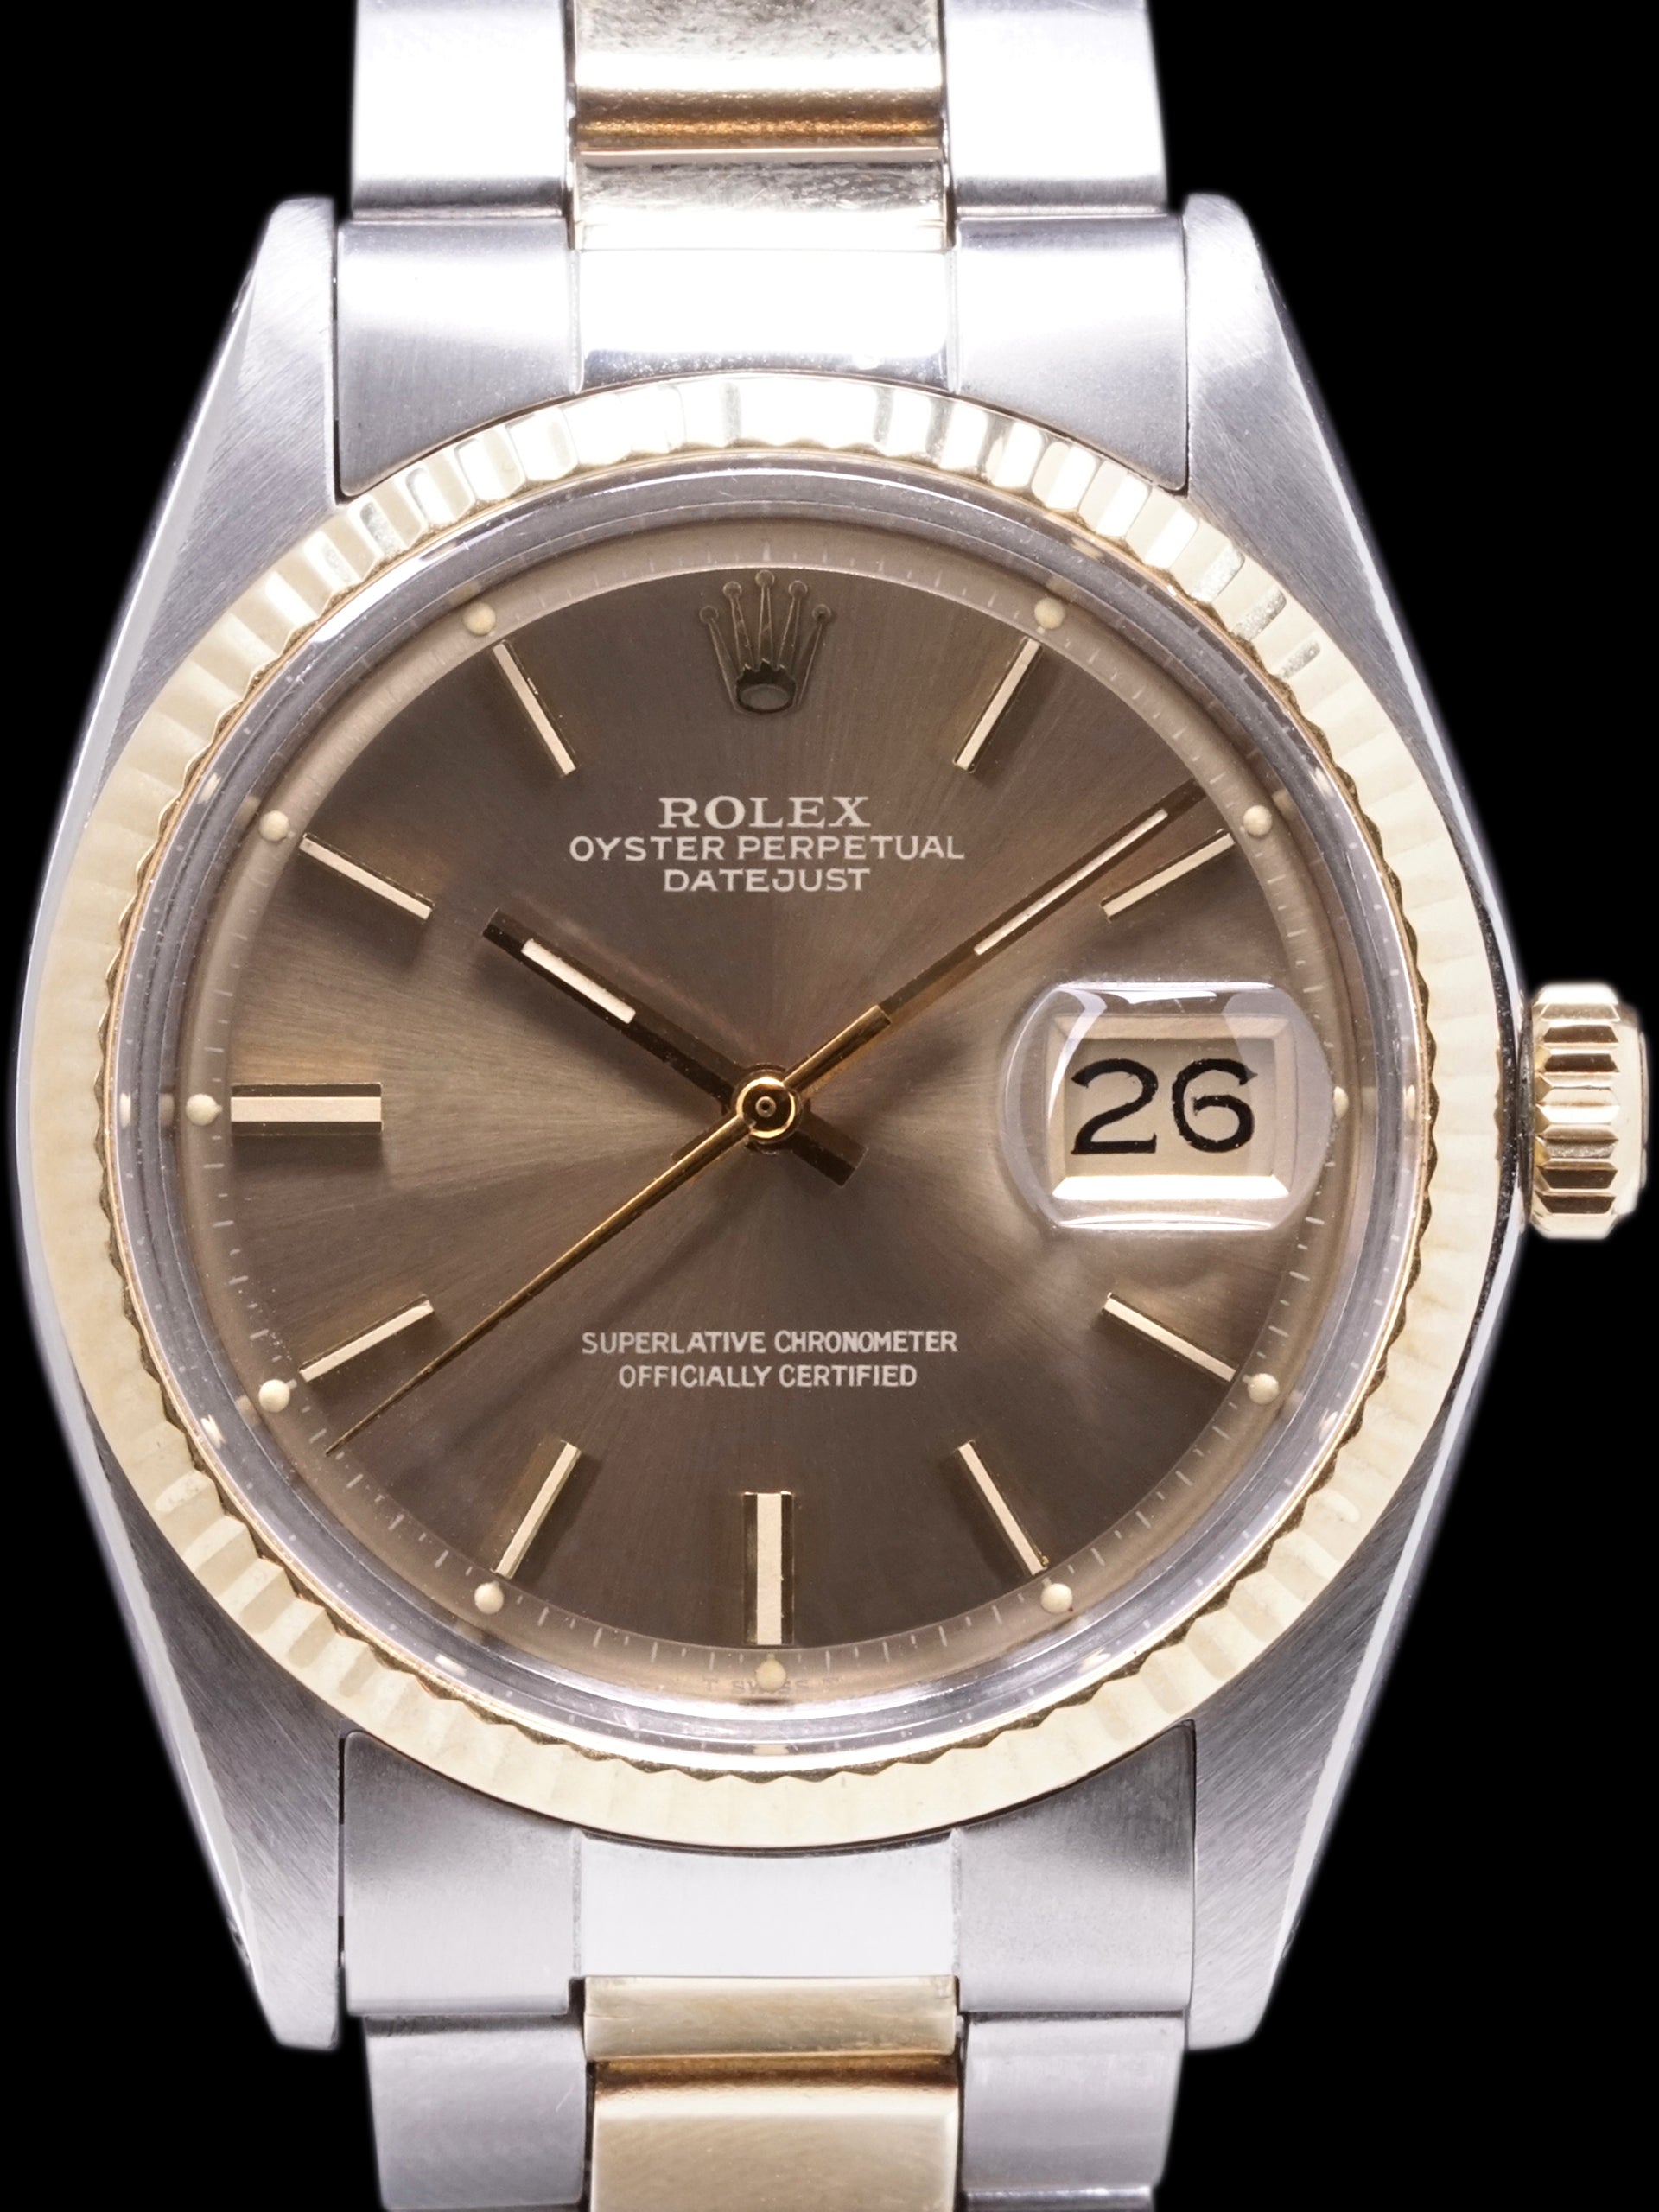 1973 Rolex Two-Tone Datejust (Ref. 1601) W/ Box, Papers, & RSC Paper